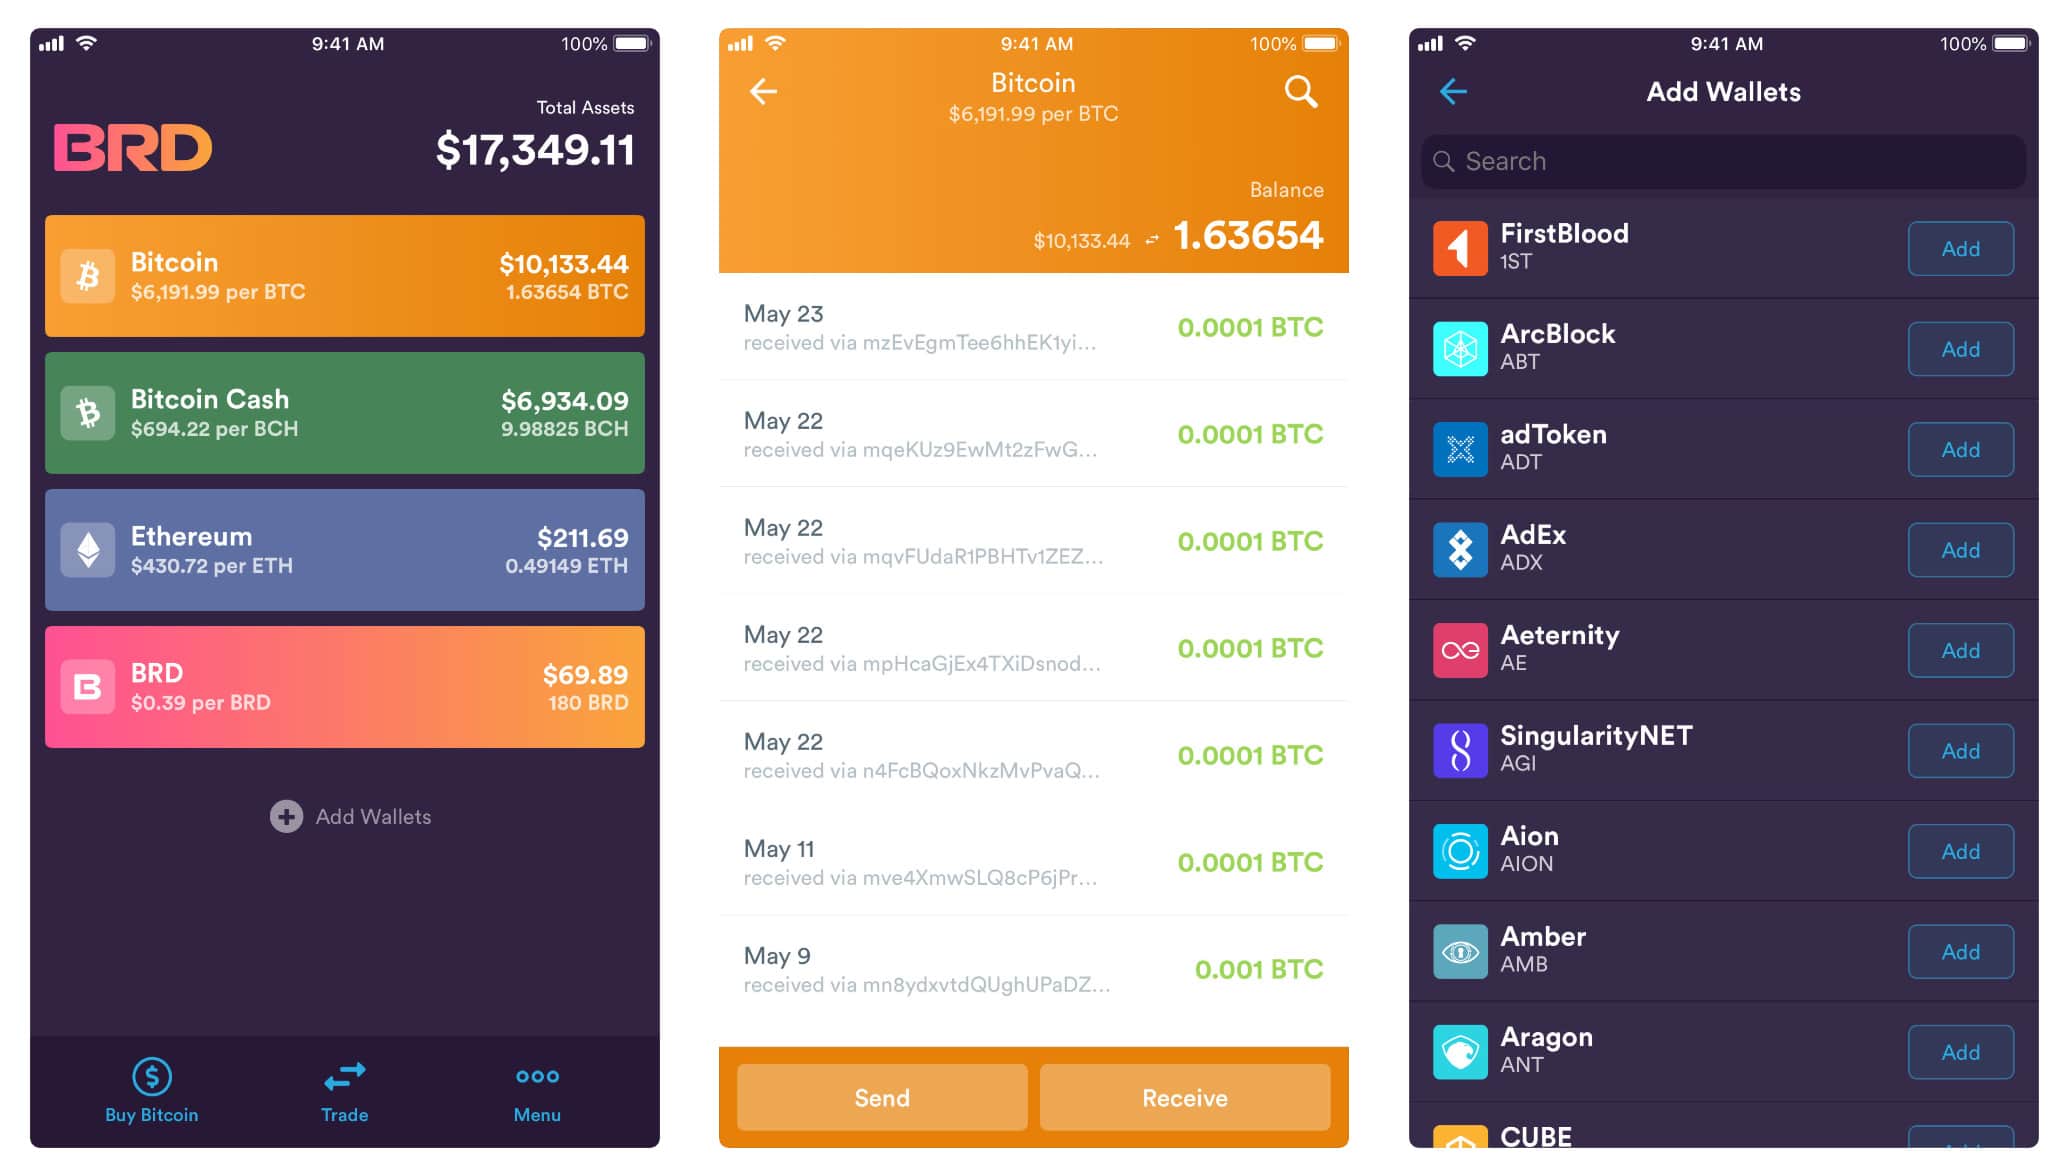 Cryptocurrency App, Bread Wallet. This personal wallet is showcased with three panels. The first shows your assets, the second shows your transaction history for Bitcoin, and the third lets you add wallets.